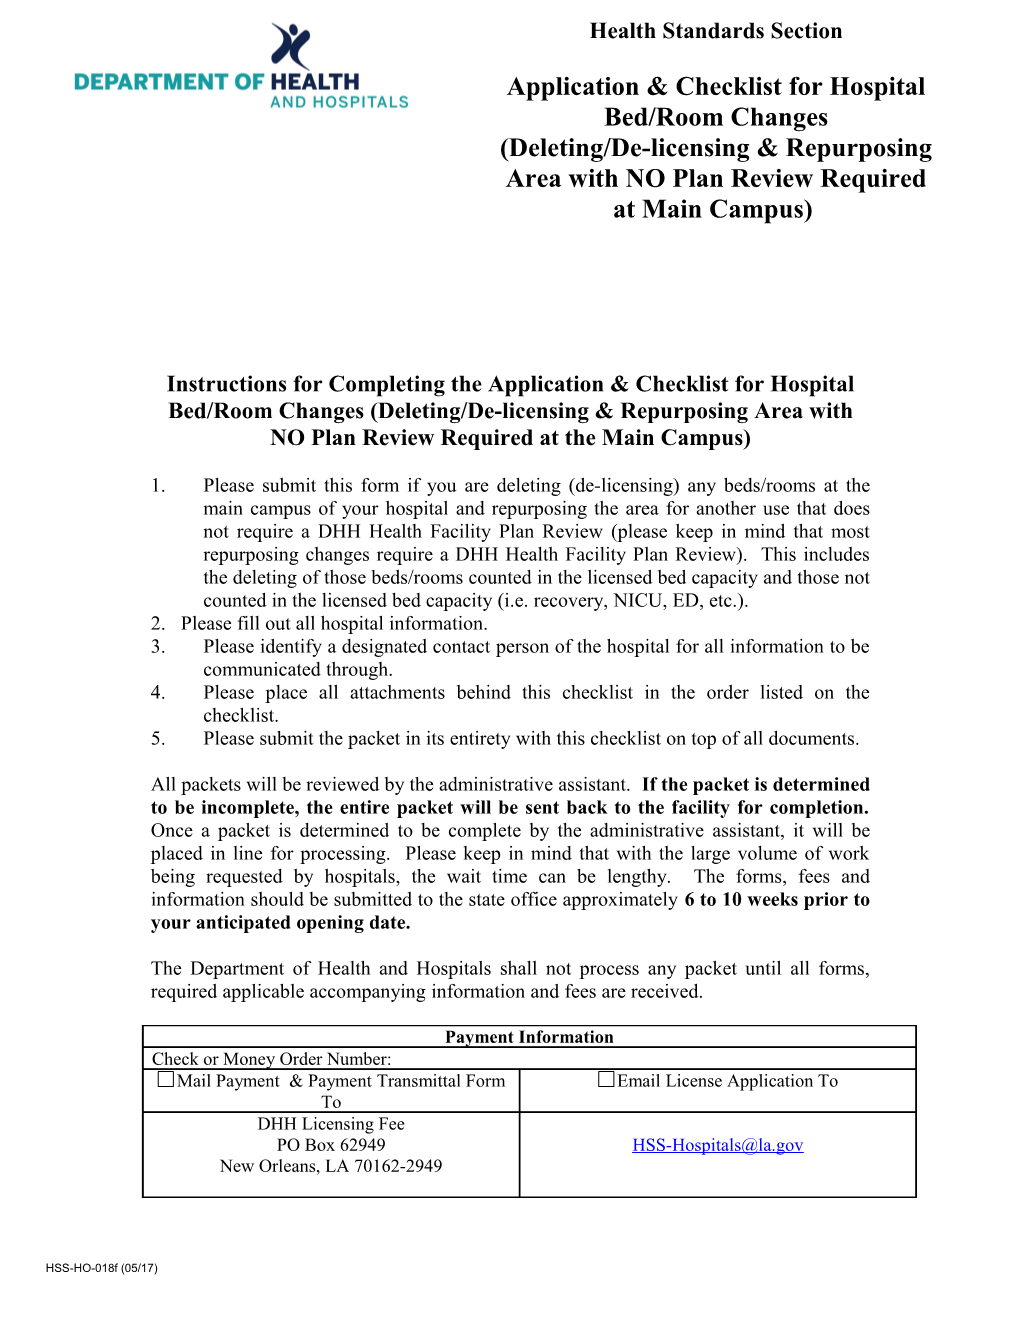 Instructions for Completing the Application & Checklist for Hospital Bed/Room Changes s1